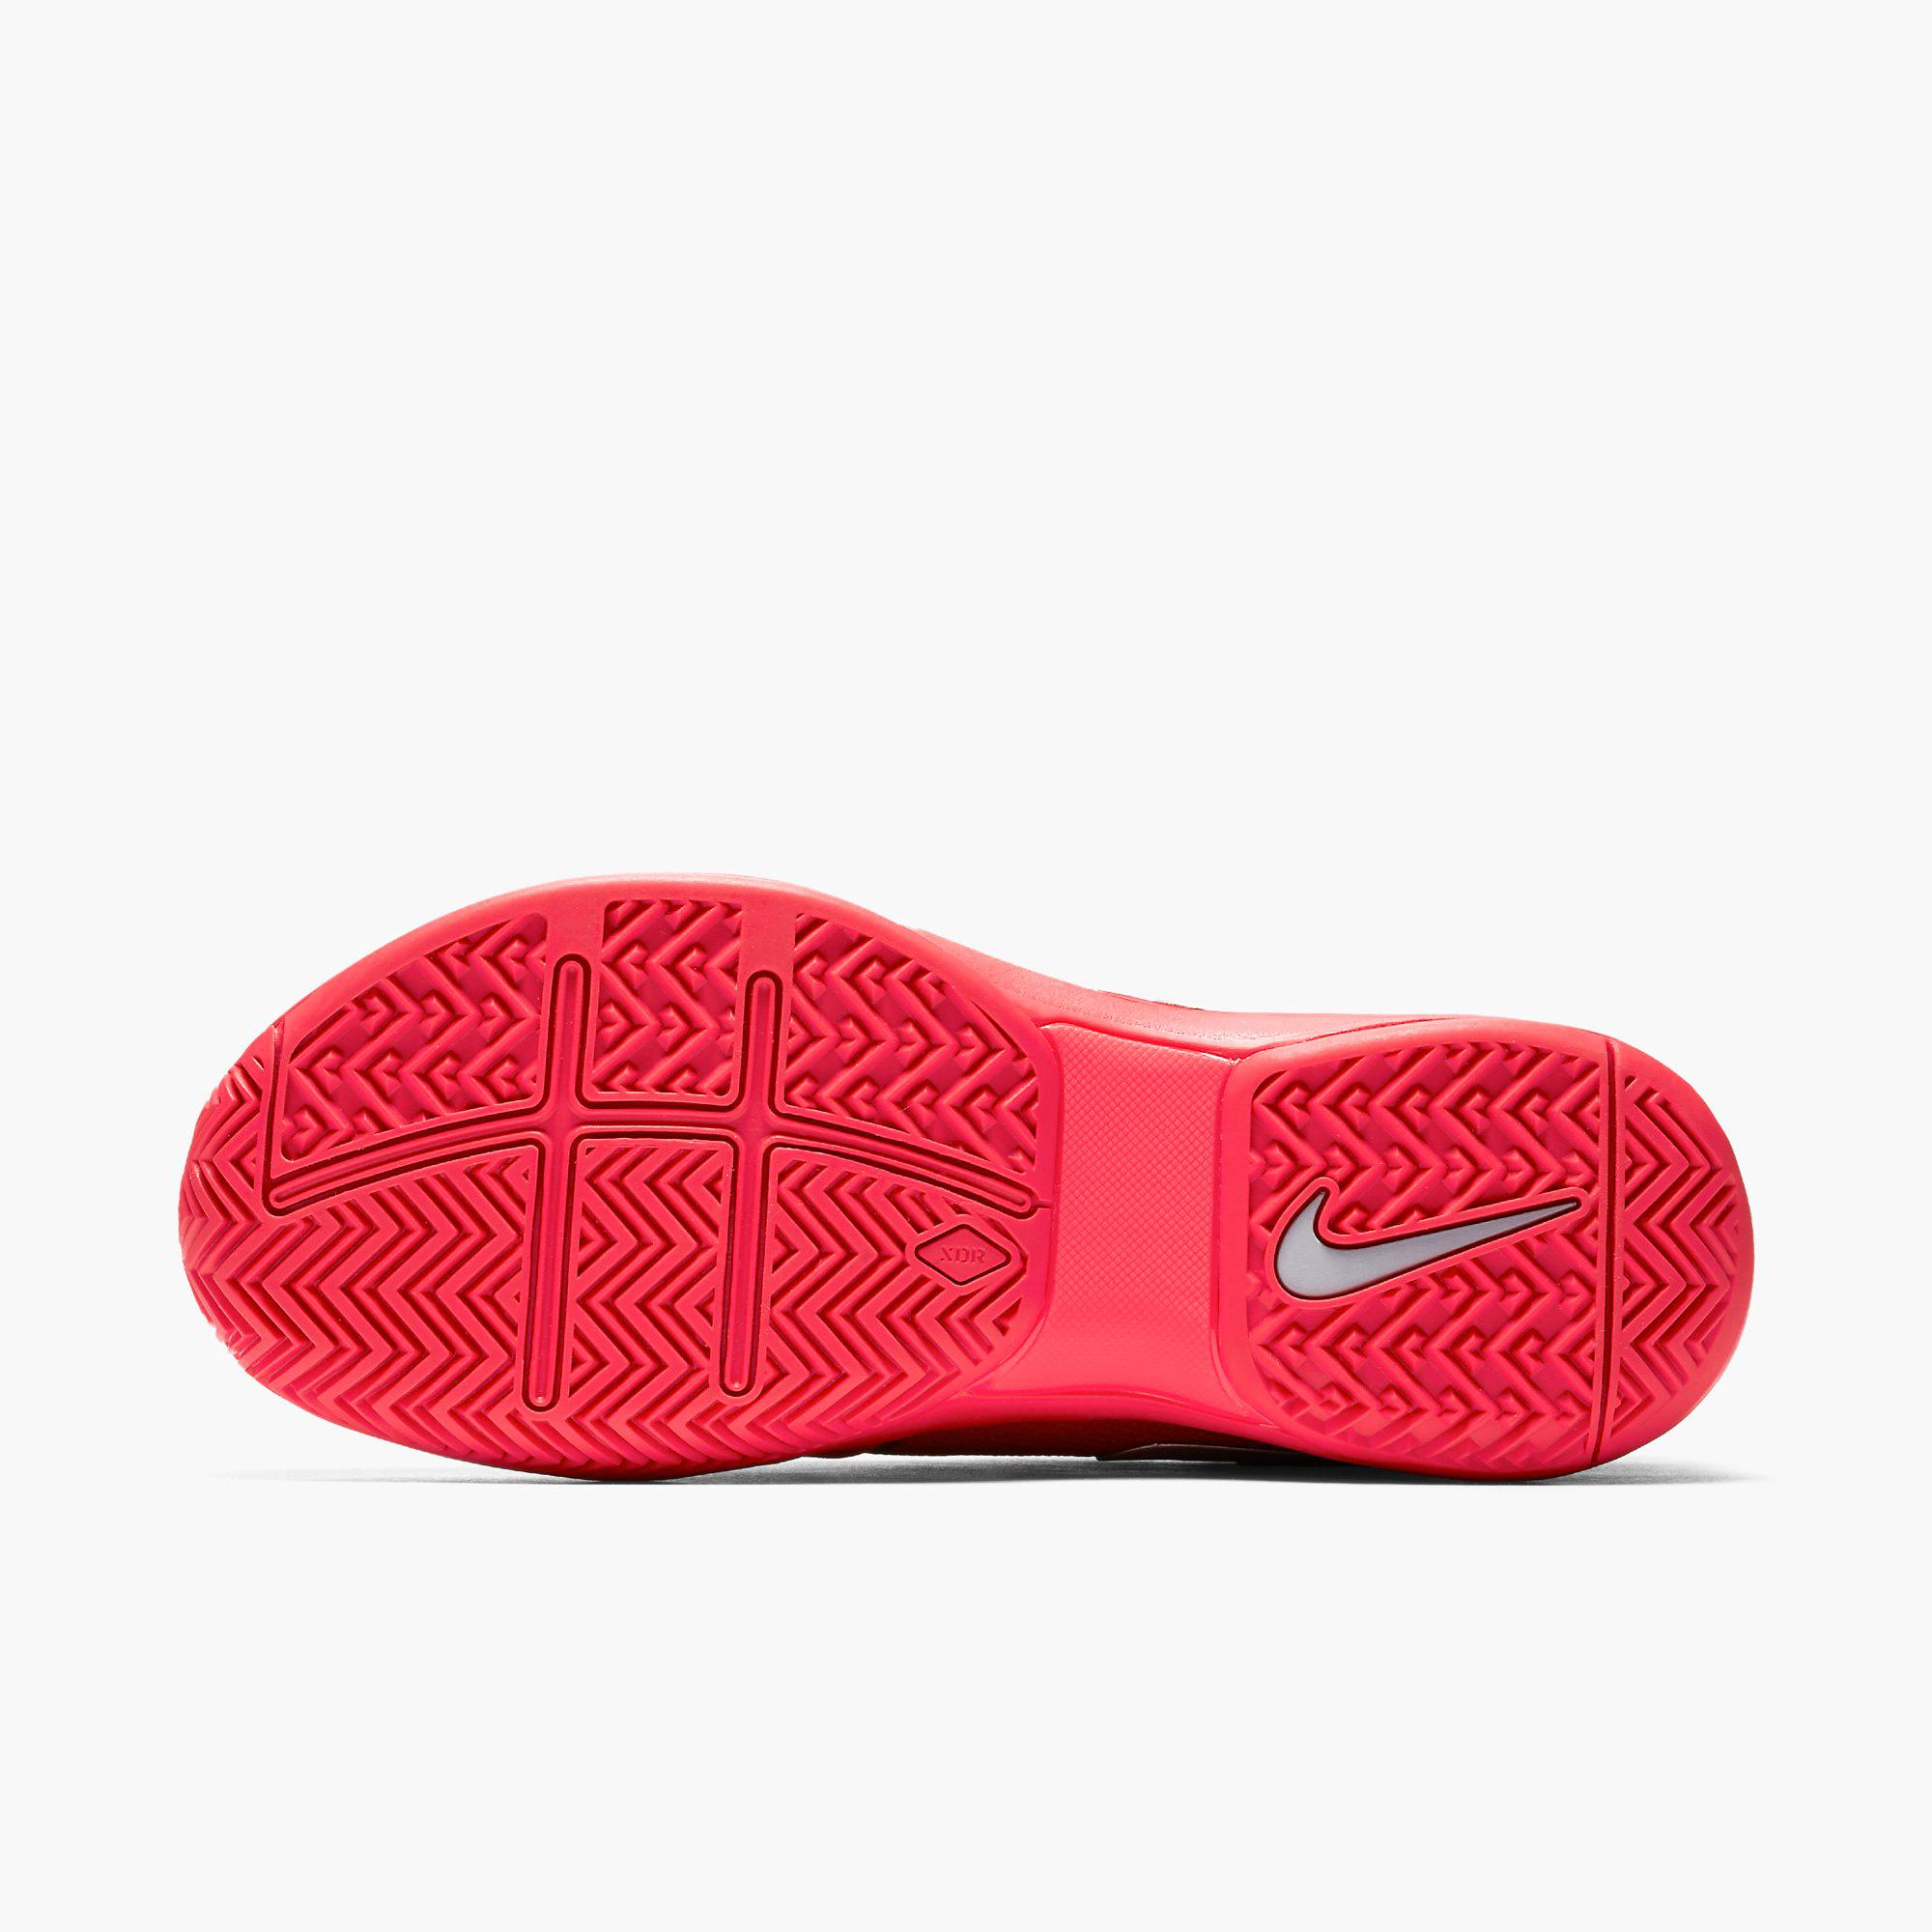 Nike Womens Zoom Vapor 9.5 Tennis Shoes - Team Red/Siren Red ...